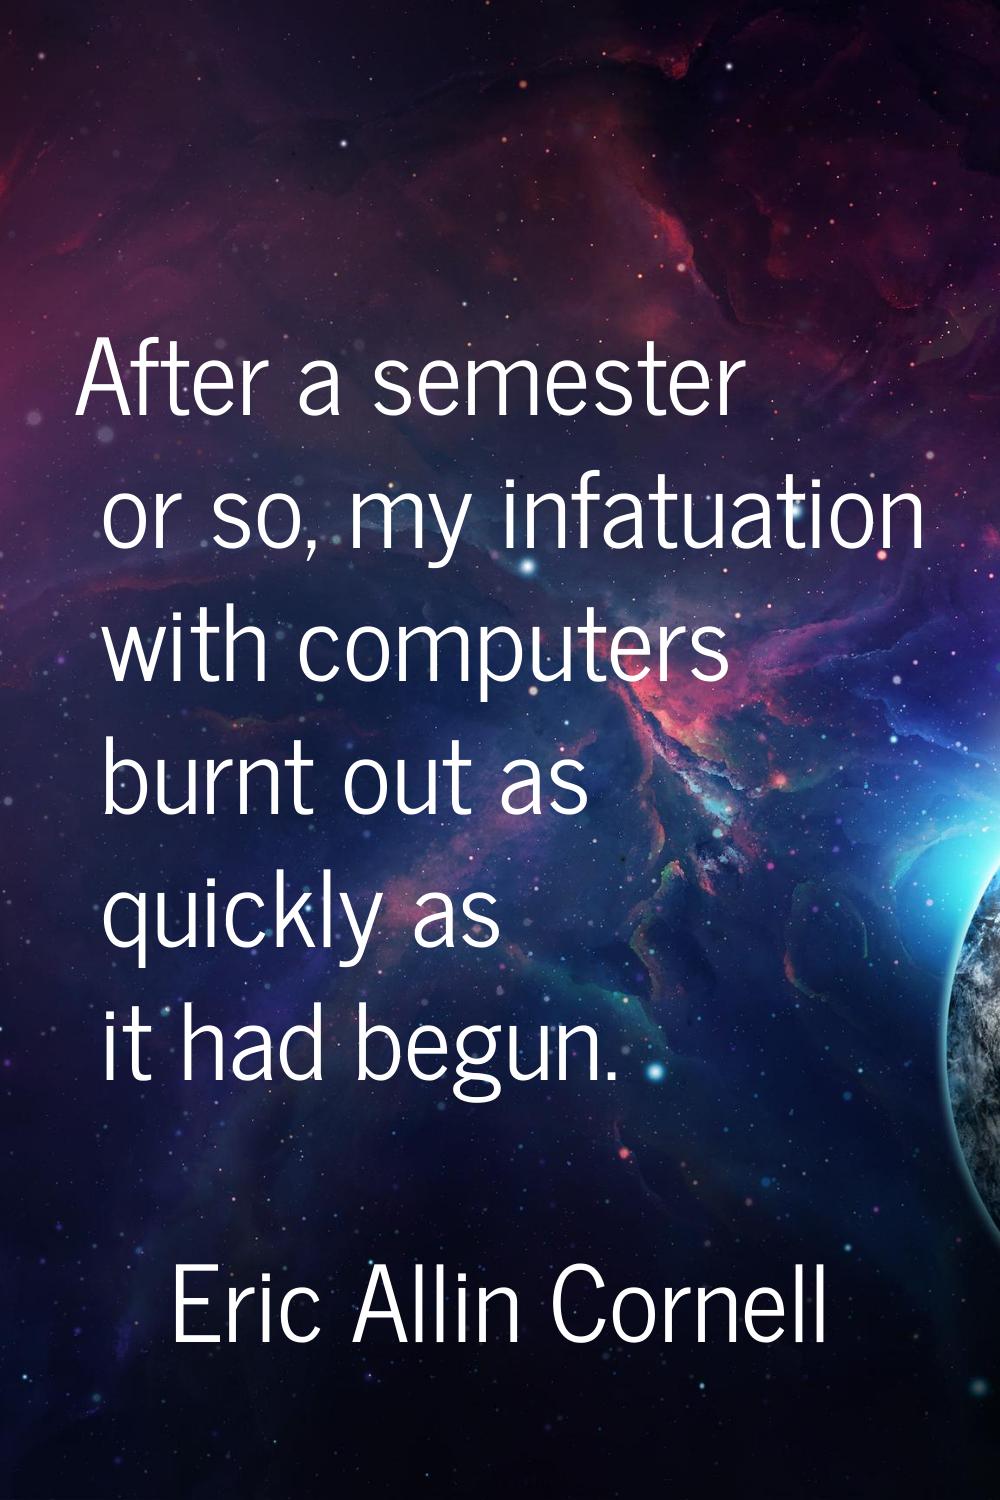 After a semester or so, my infatuation with computers burnt out as quickly as it had begun.